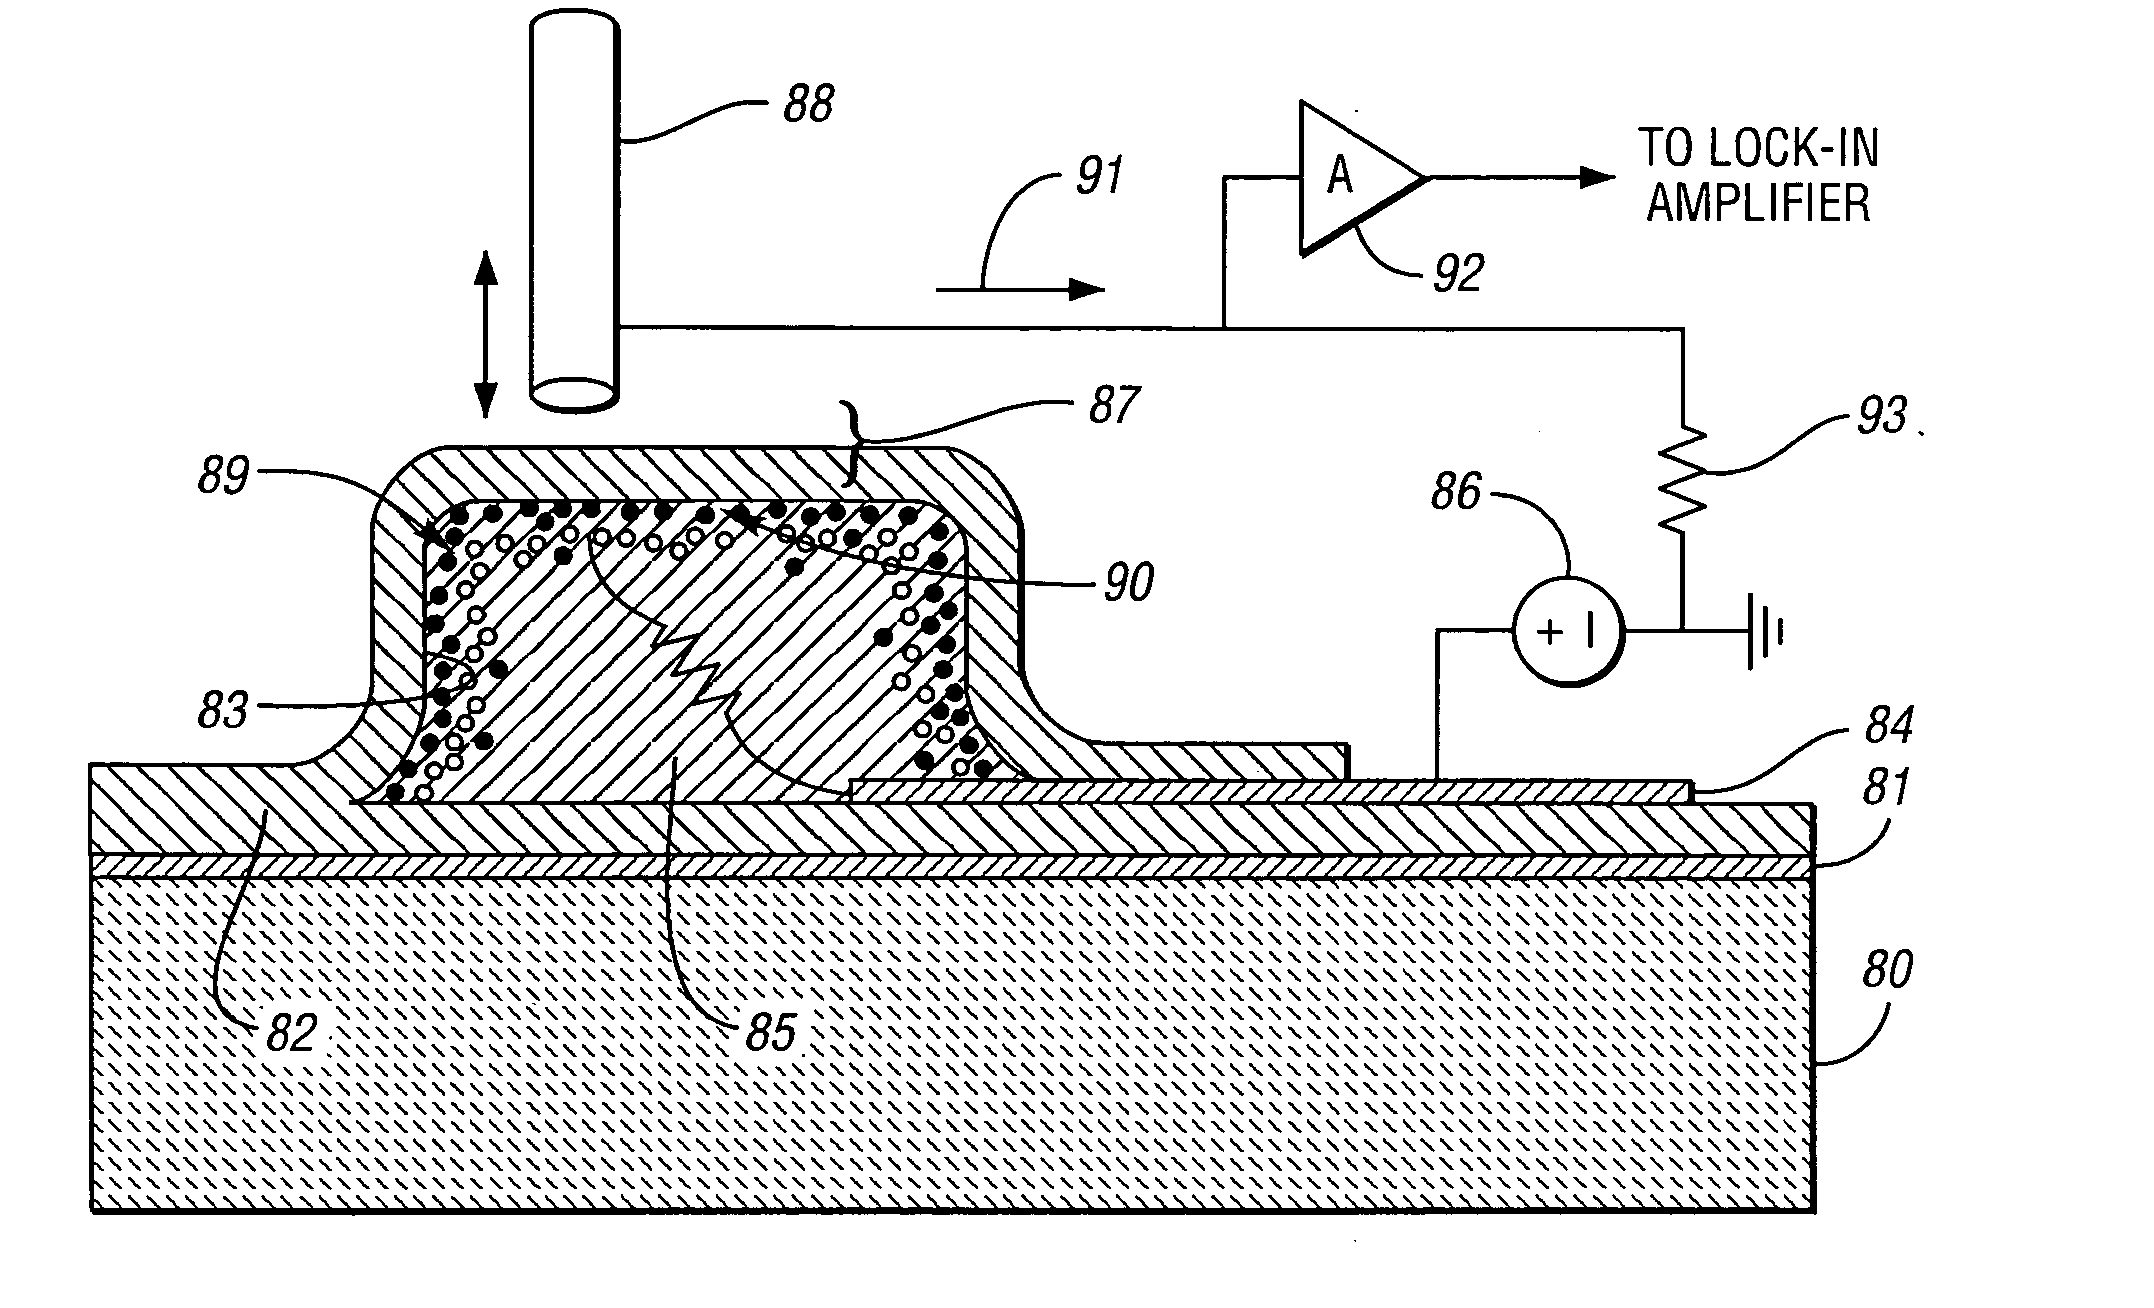 Micromachined probe apparatus and methods for making and using same to characterize liquid in a fluidic channel and map embedded charge in a sample on a substrate